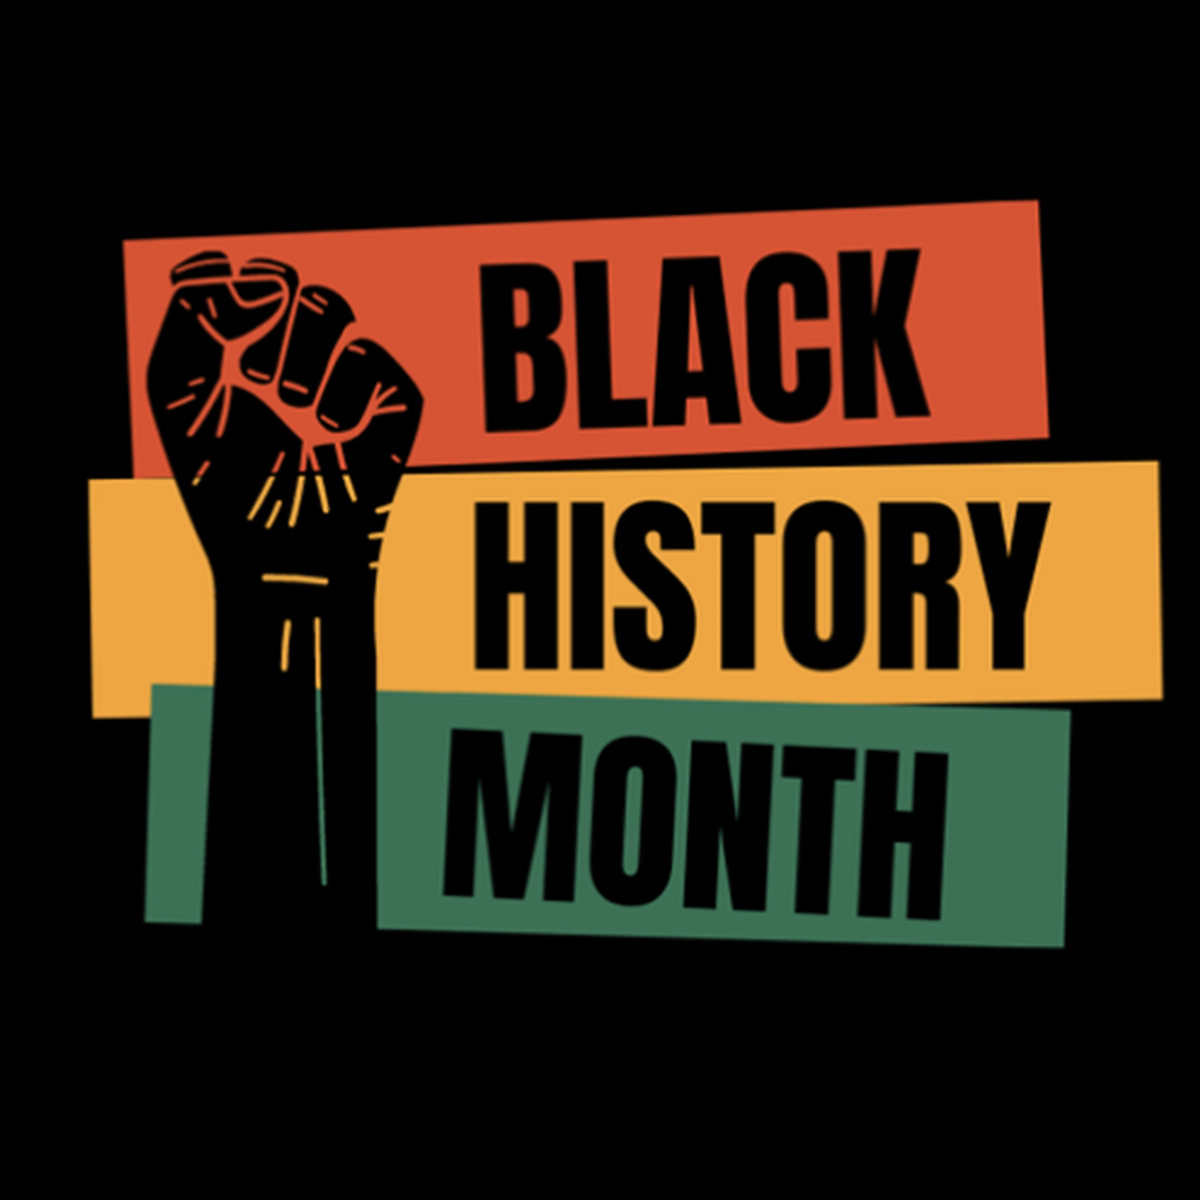 Black+History+Month+is+Every+Month